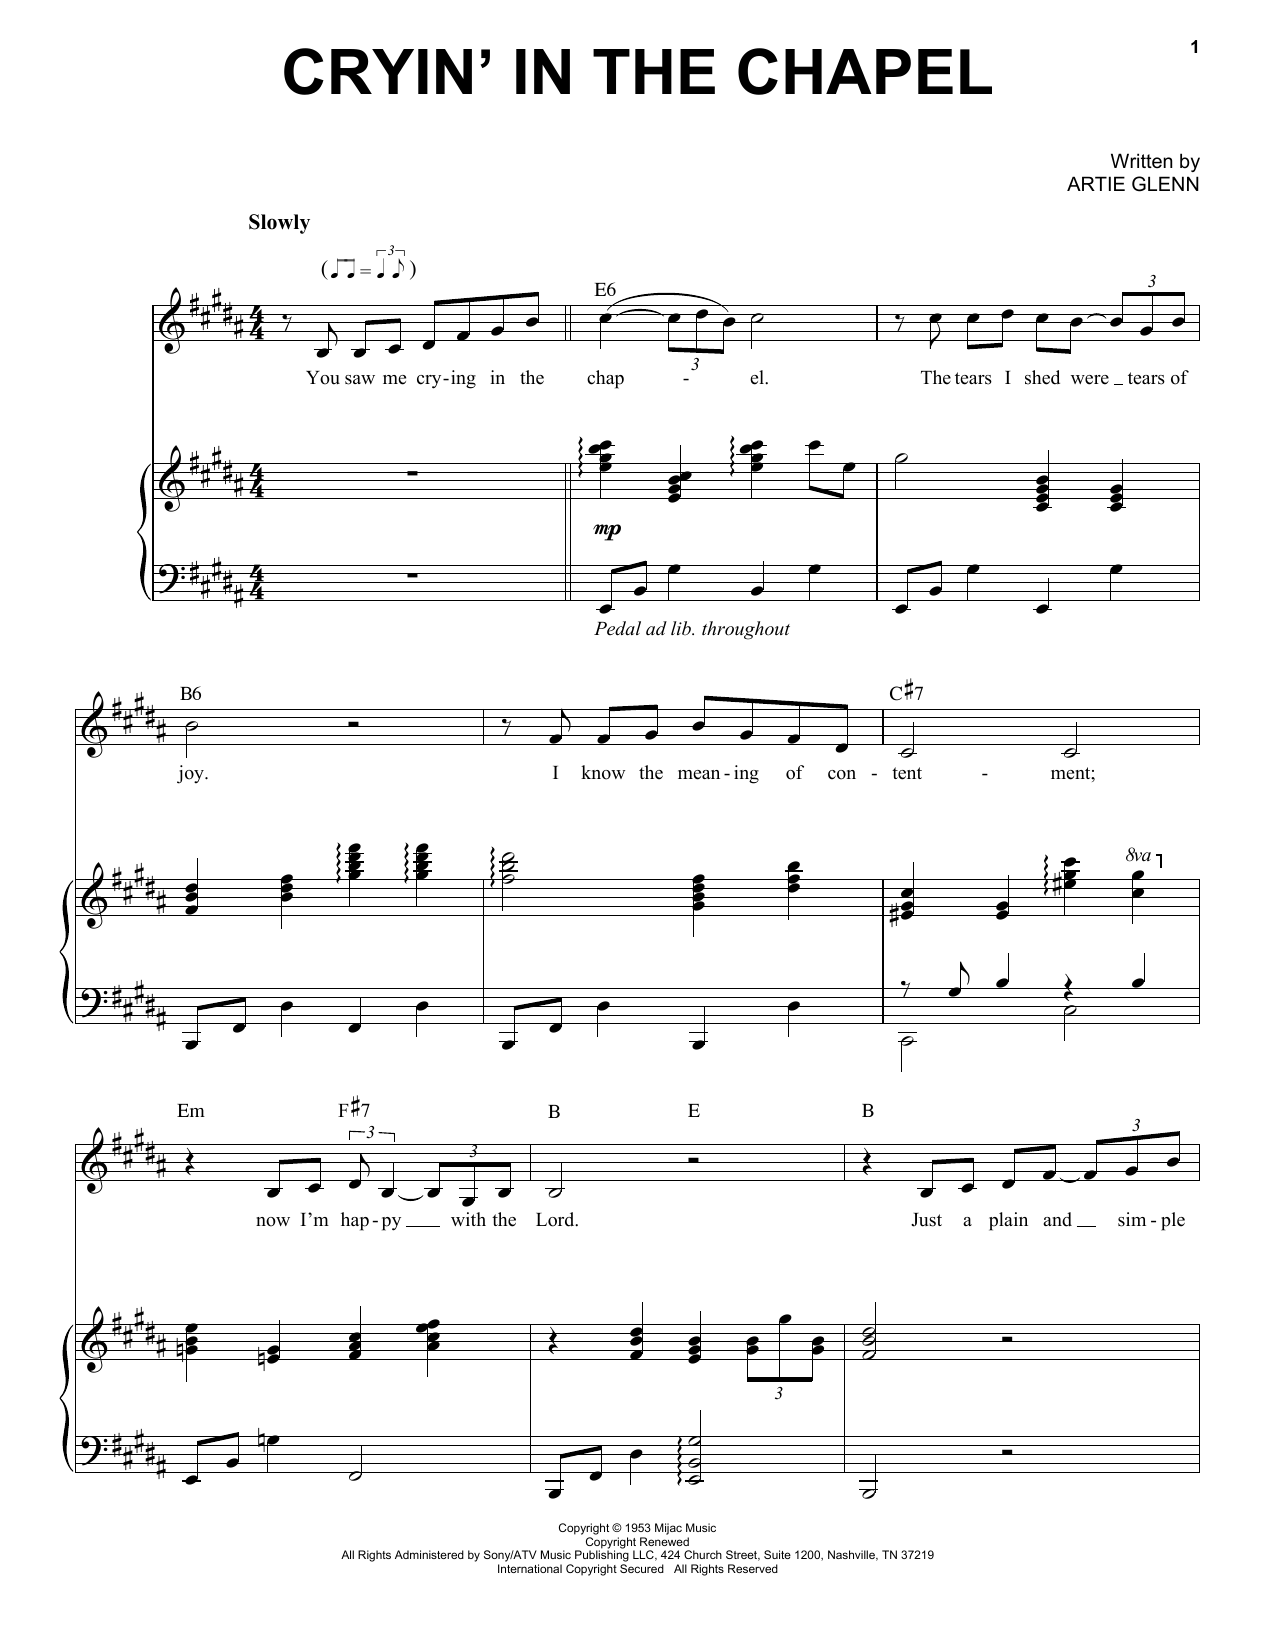 Download Elvis Presley Cryin' In The Chapel Sheet Music